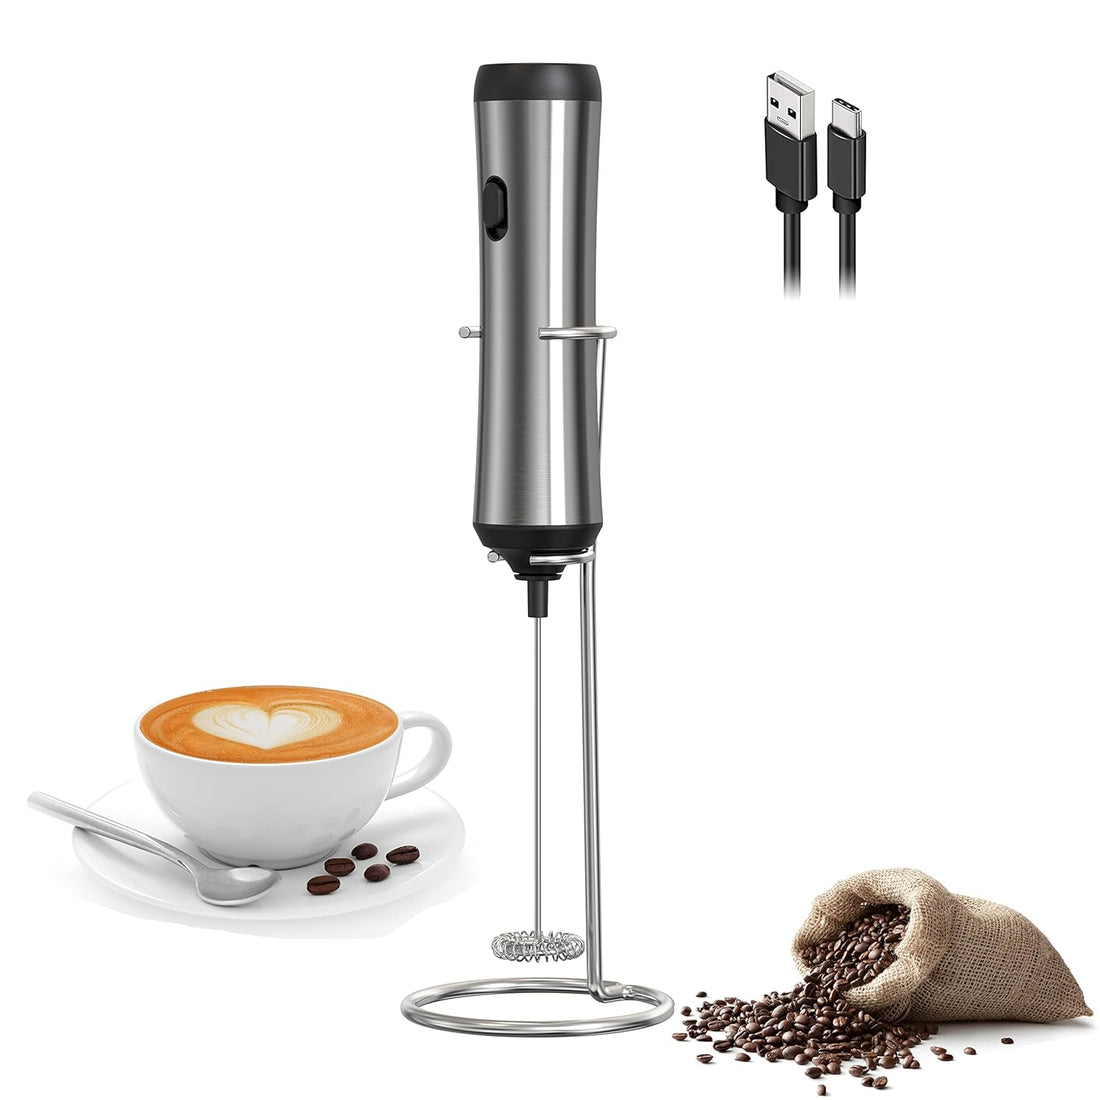 Rechargeable Milk Frother USB Charging Handheld Foam Maker with Balloon Whisk